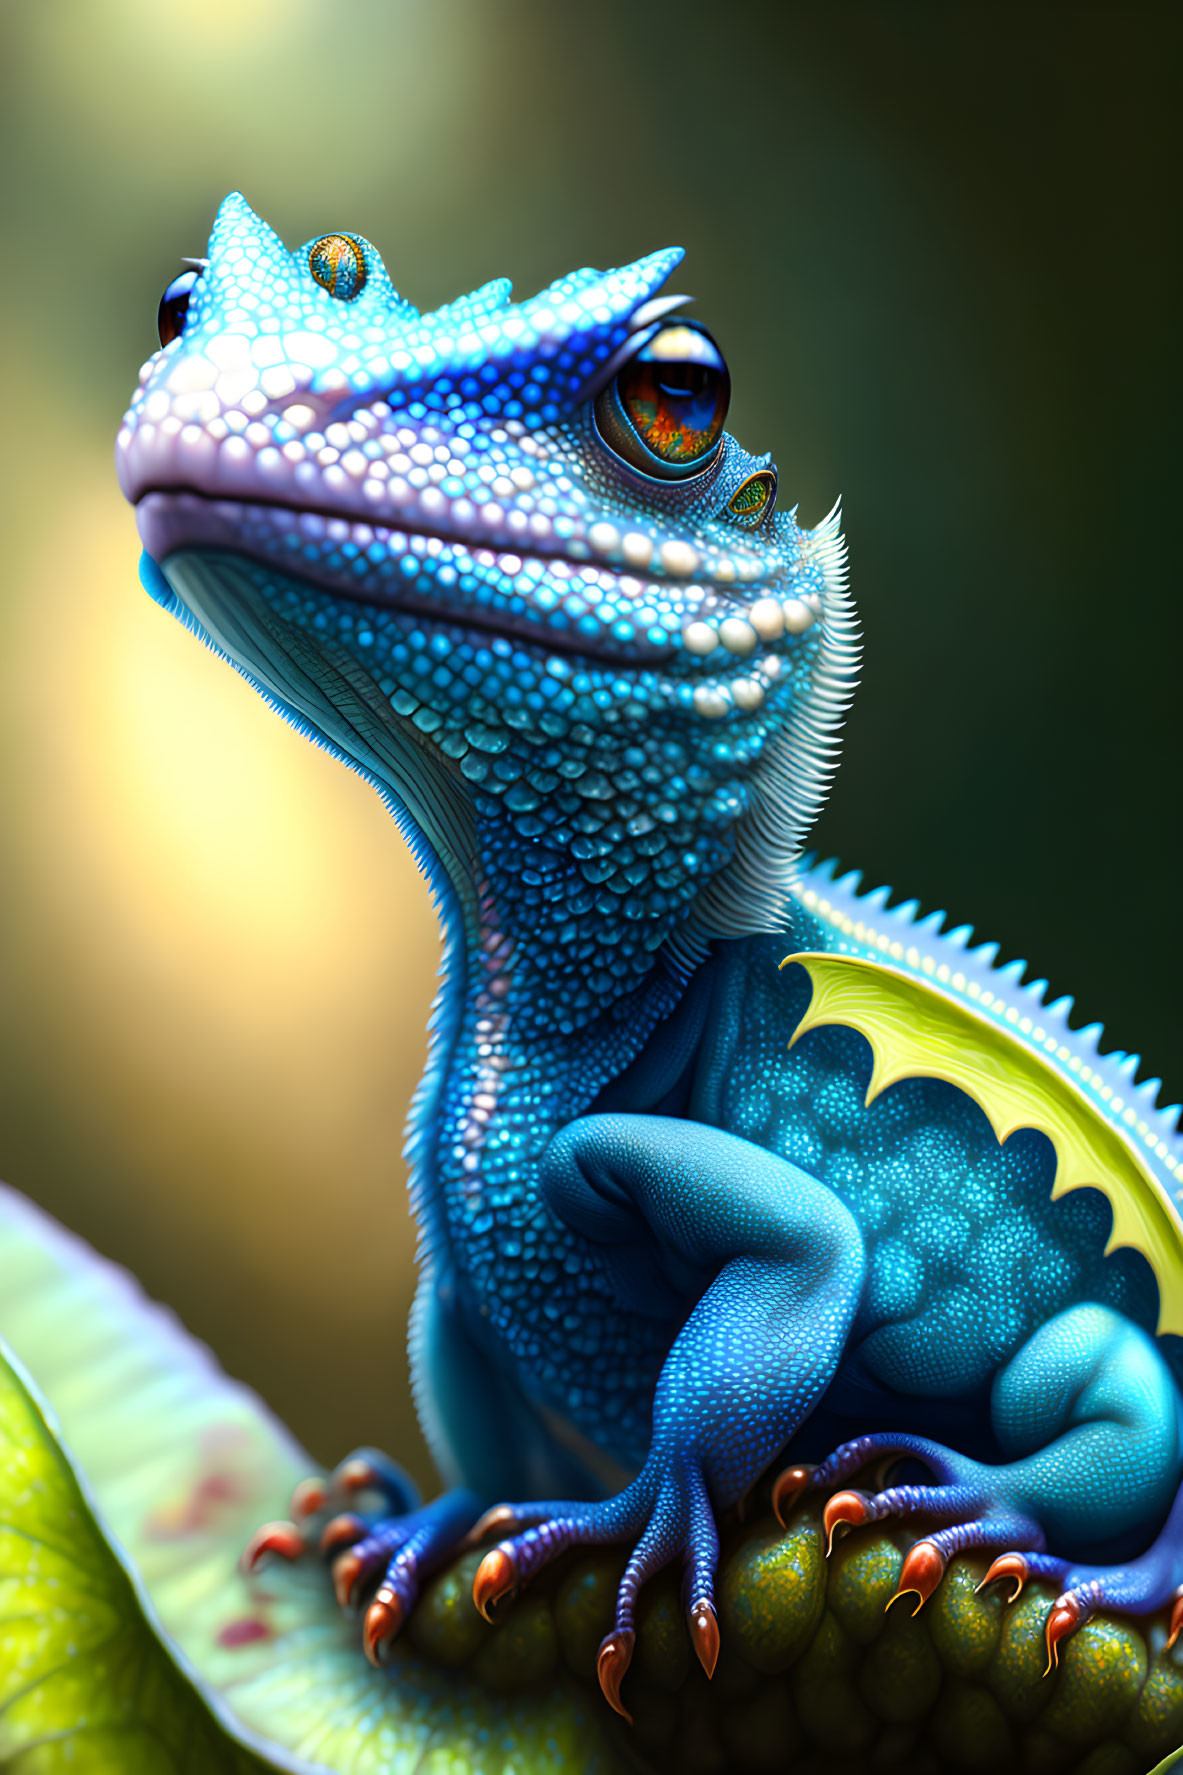 Detailed Blue Gecko with Orange Eyes on Green Surface